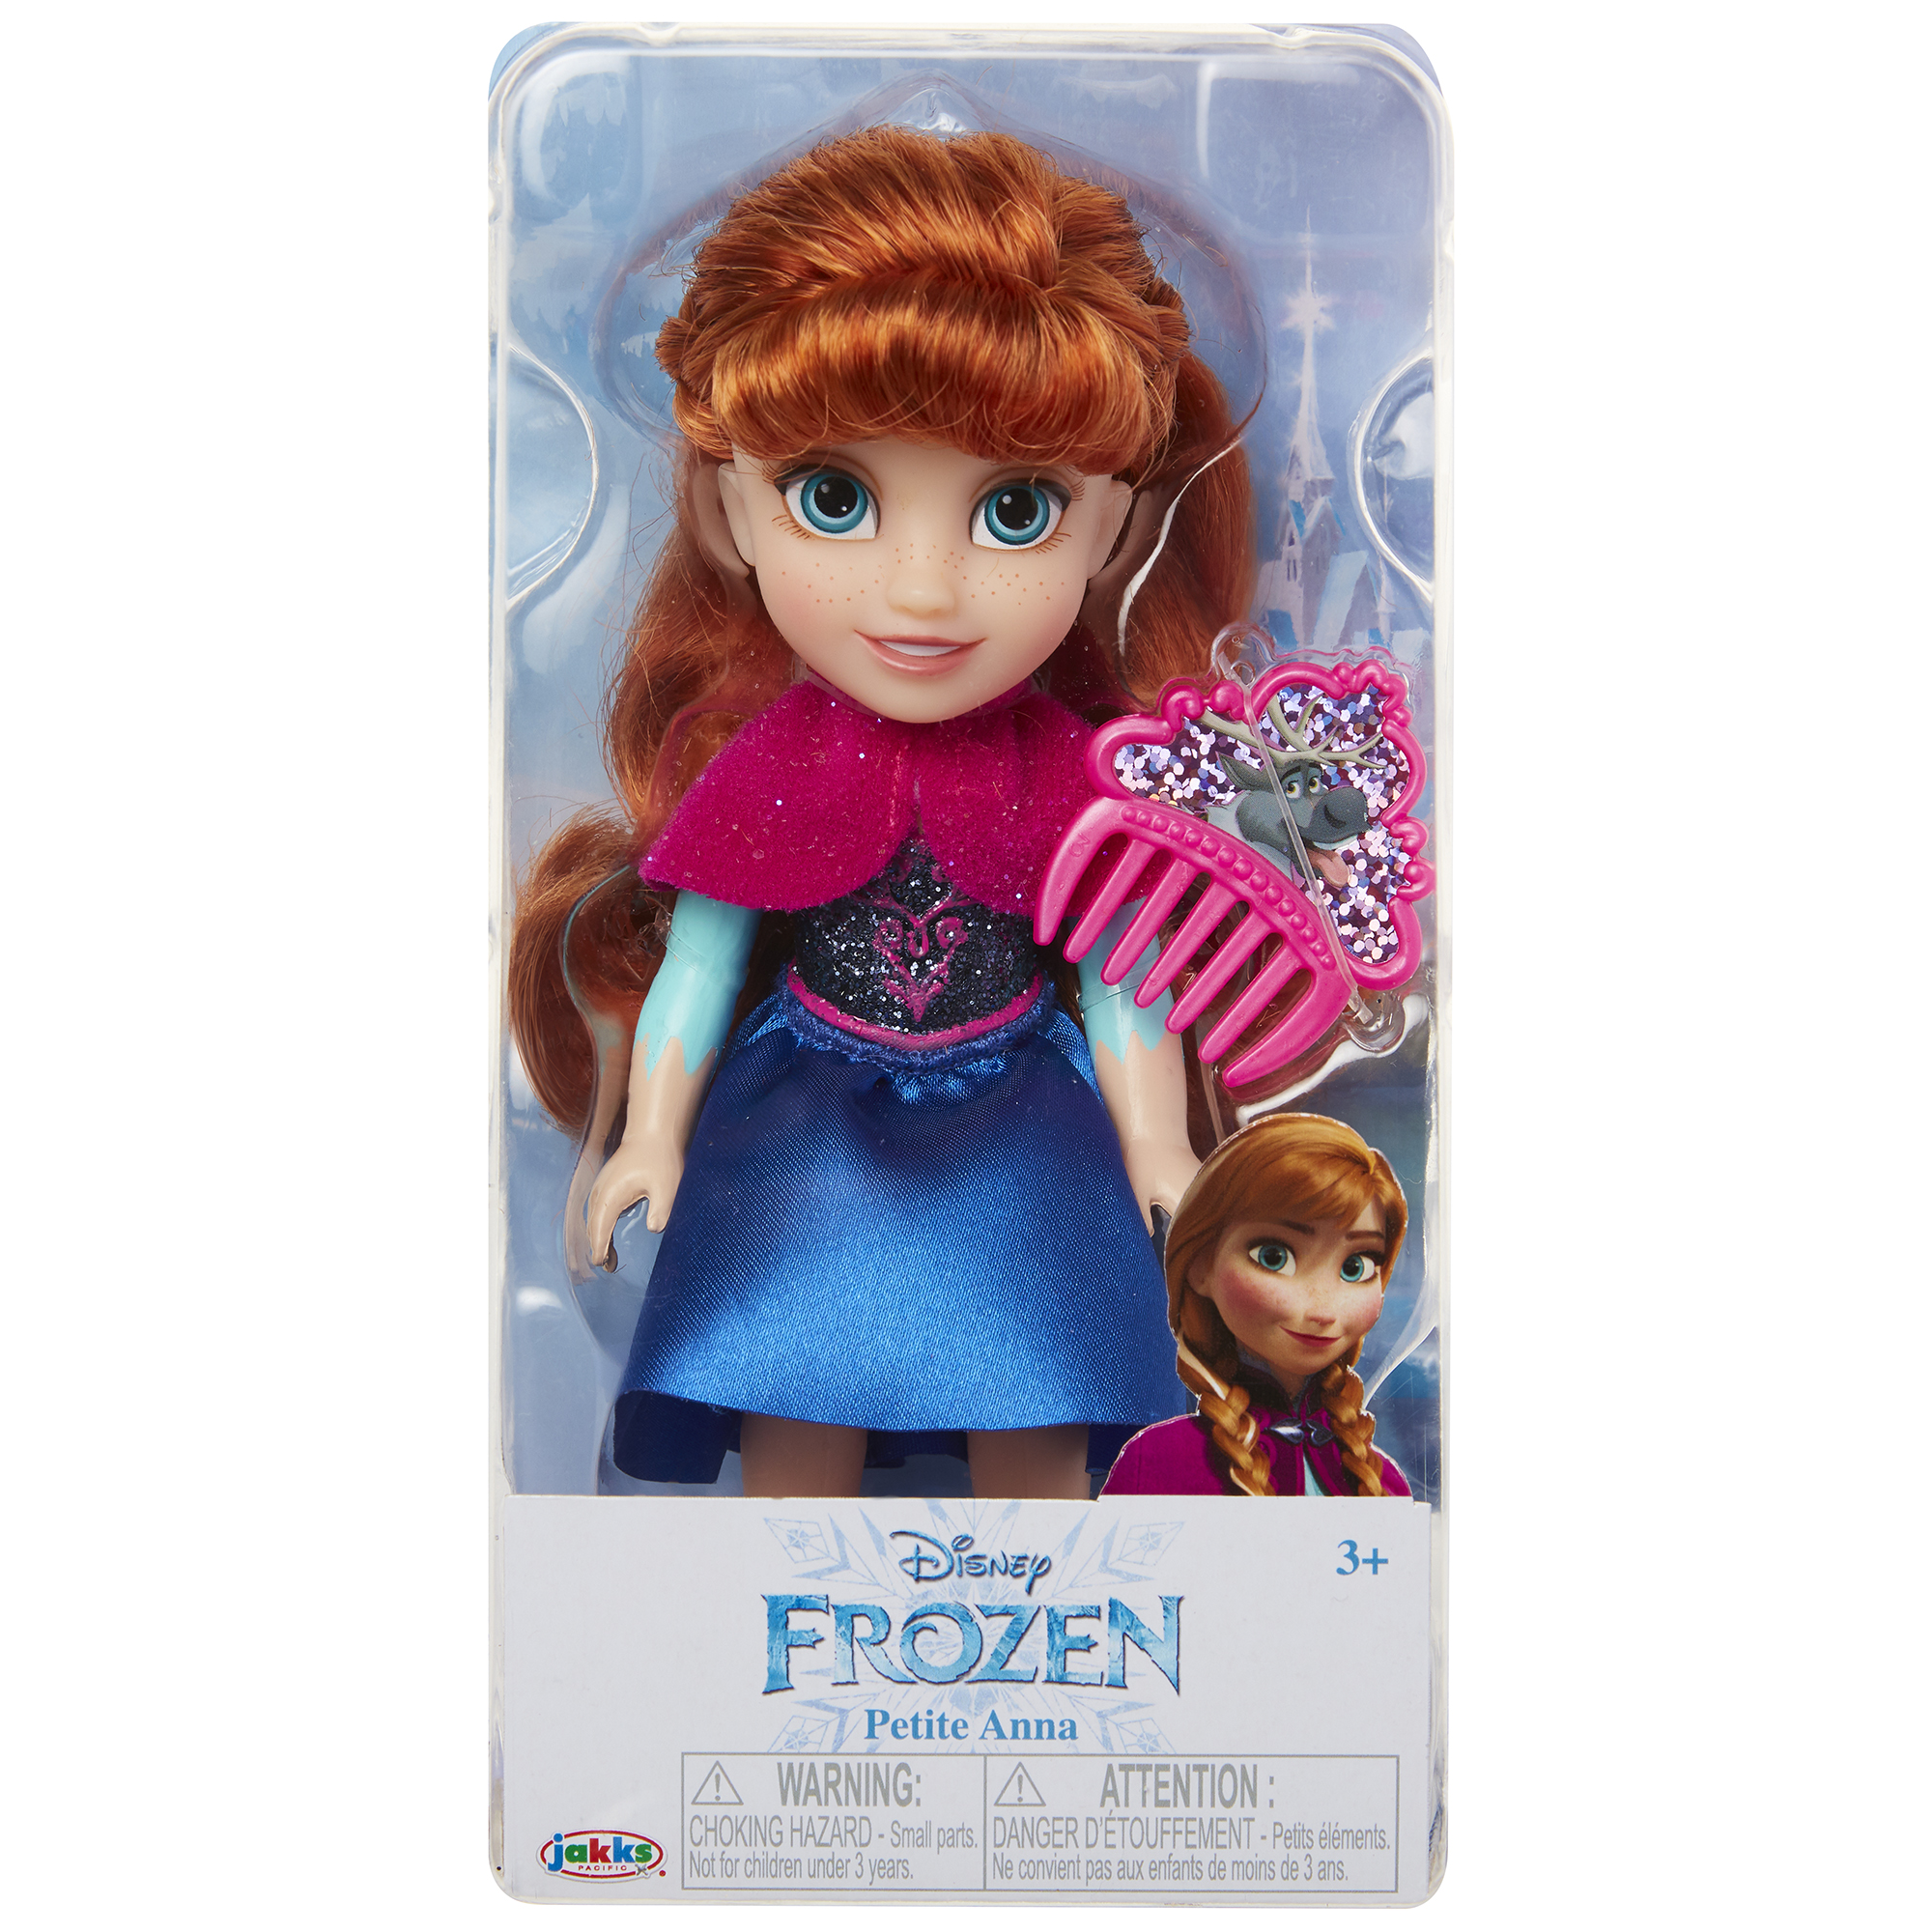 Disney Frozen Princess Anna 6" Petite Doll with Glittered Hard Bodice and Comb - image 4 of 6